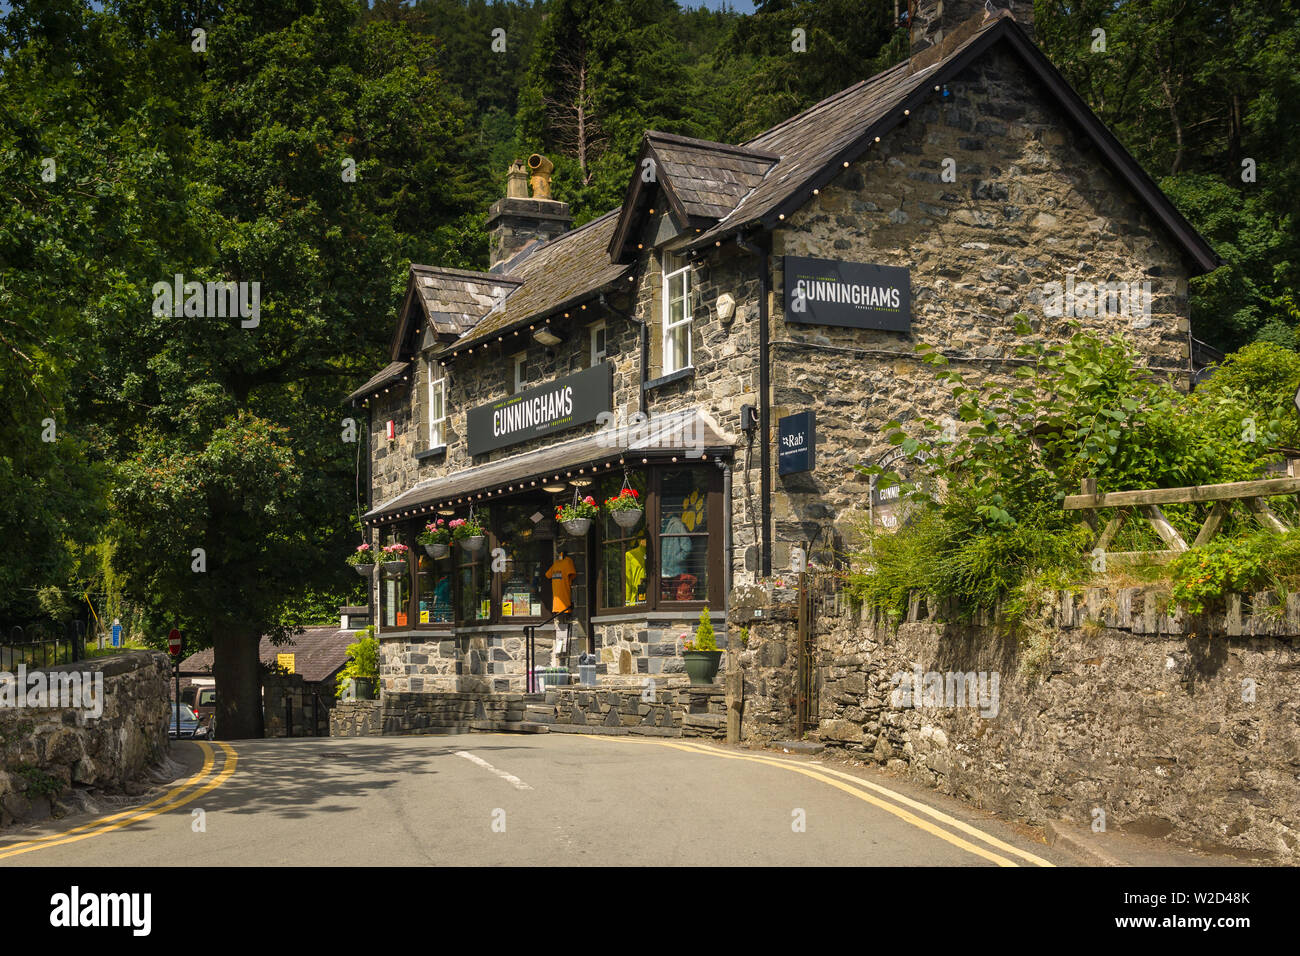 Cunninghams outdoor clothing and equipment shop in Betws y Coed a retail store supplying climbing camping and outdoor clothing and equipment Stock Photo